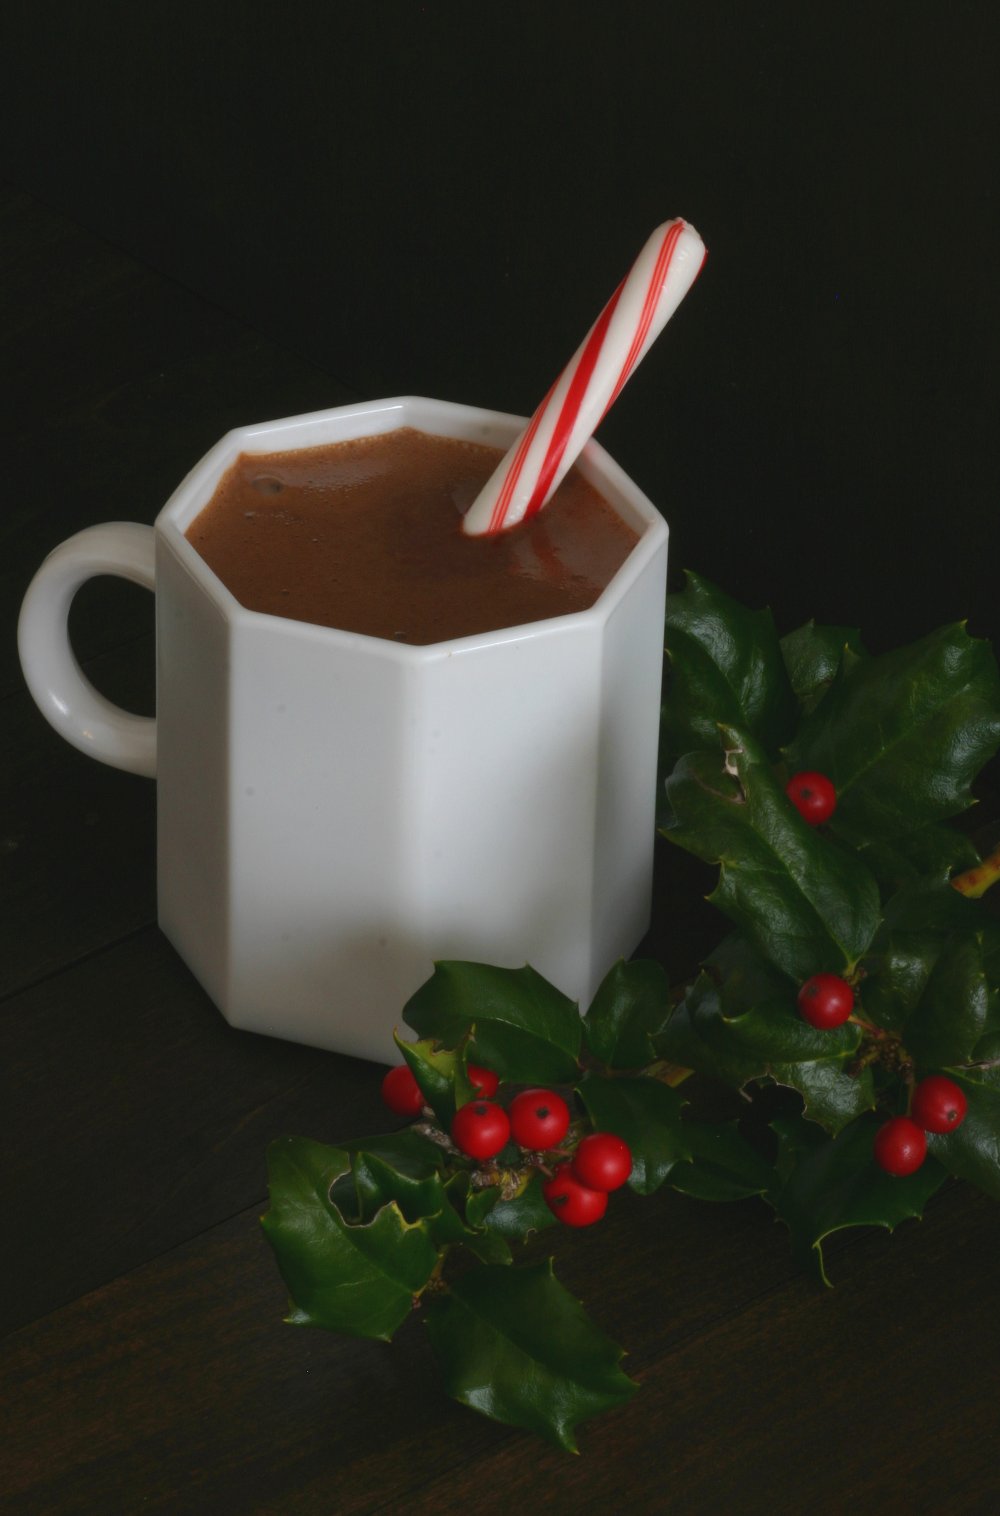 A 10-minute recipe for rich and decadent Vegan Hot Chocolate. Three optional variations: Mocha, Peppermint, and Mexican-style.